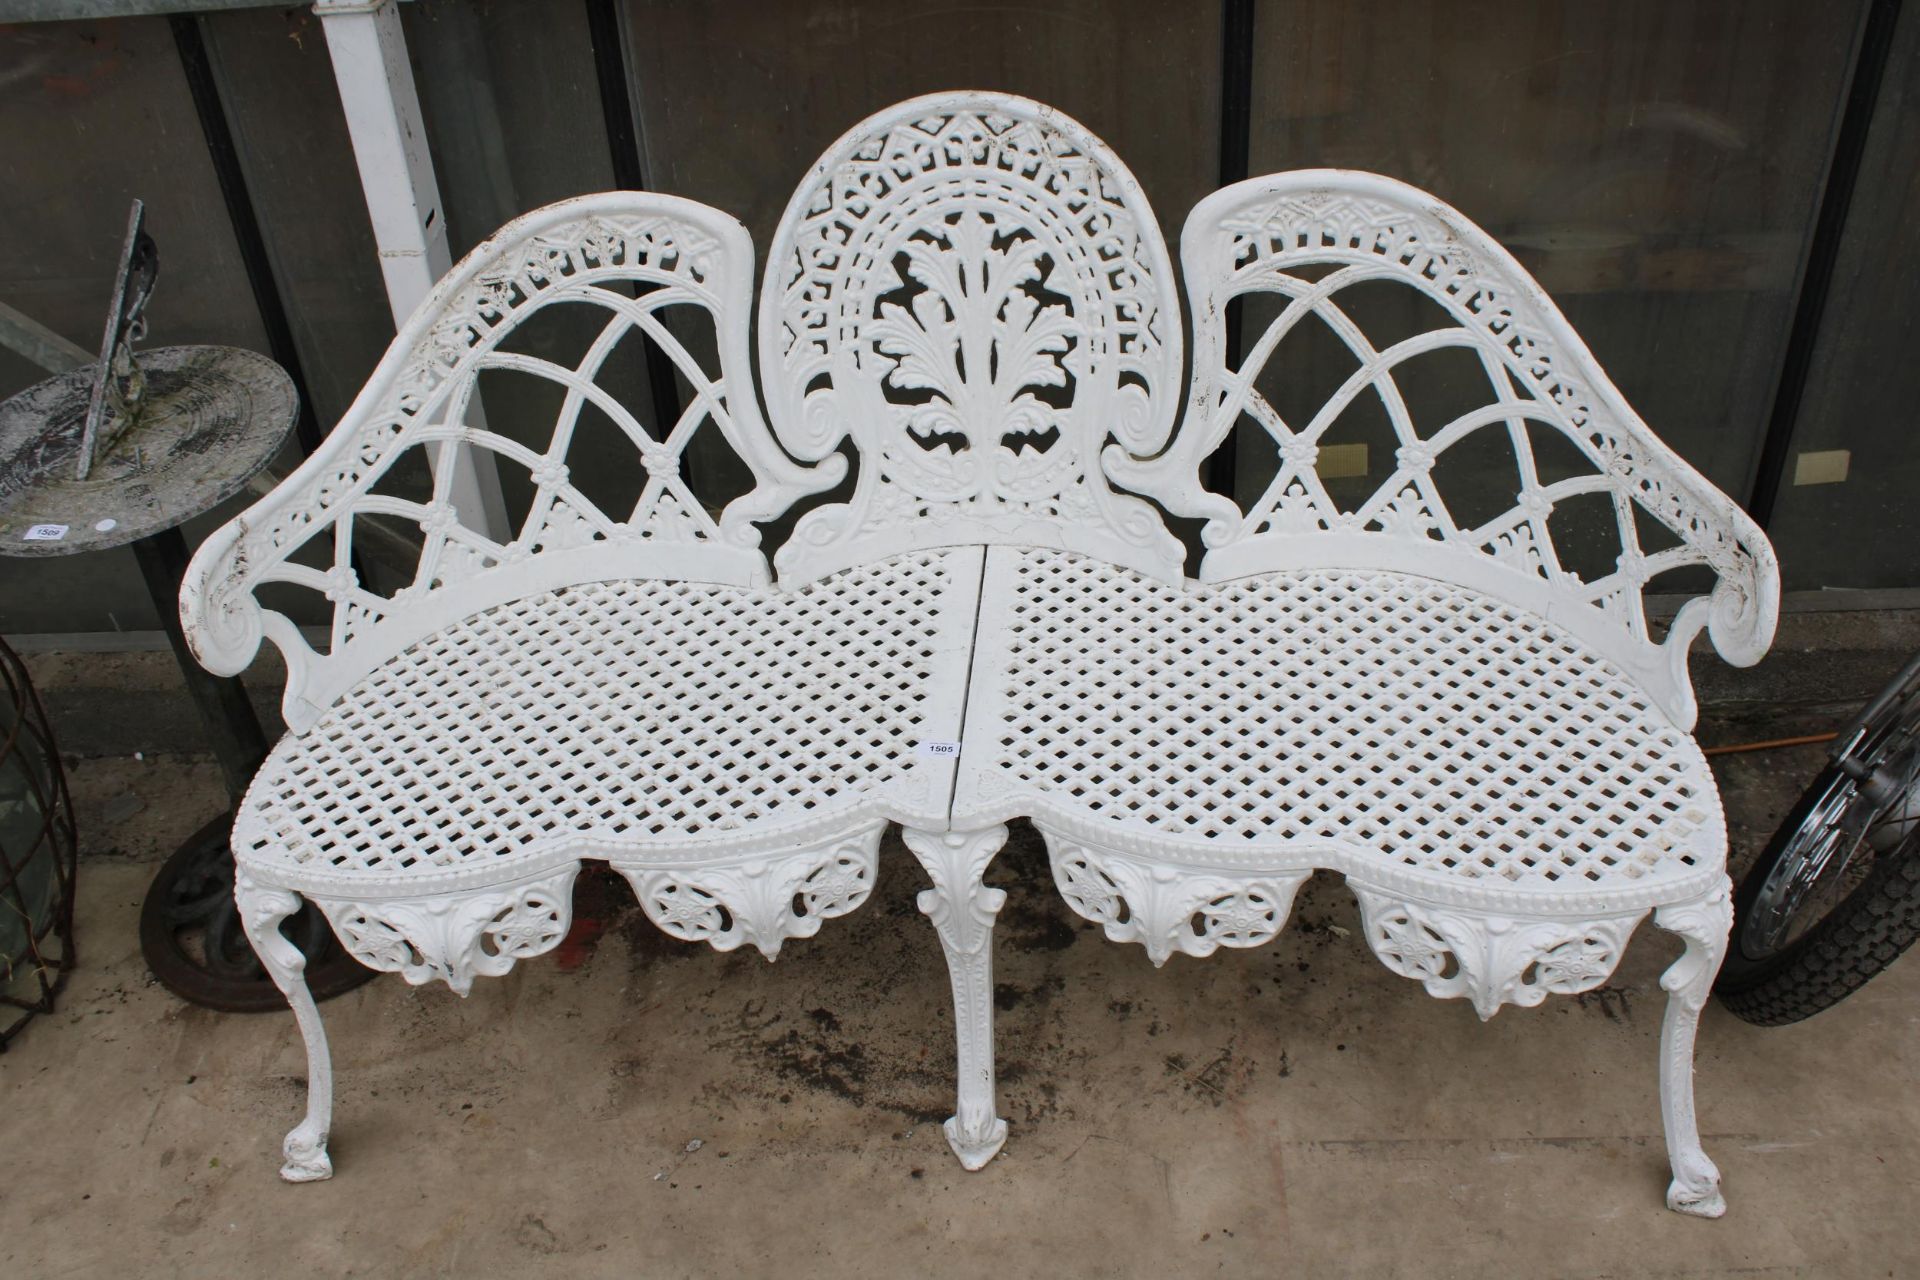 A DECORATIVE WHITE PAINTED CAST ALLOY THREE SEATER BENCH - Image 2 of 3